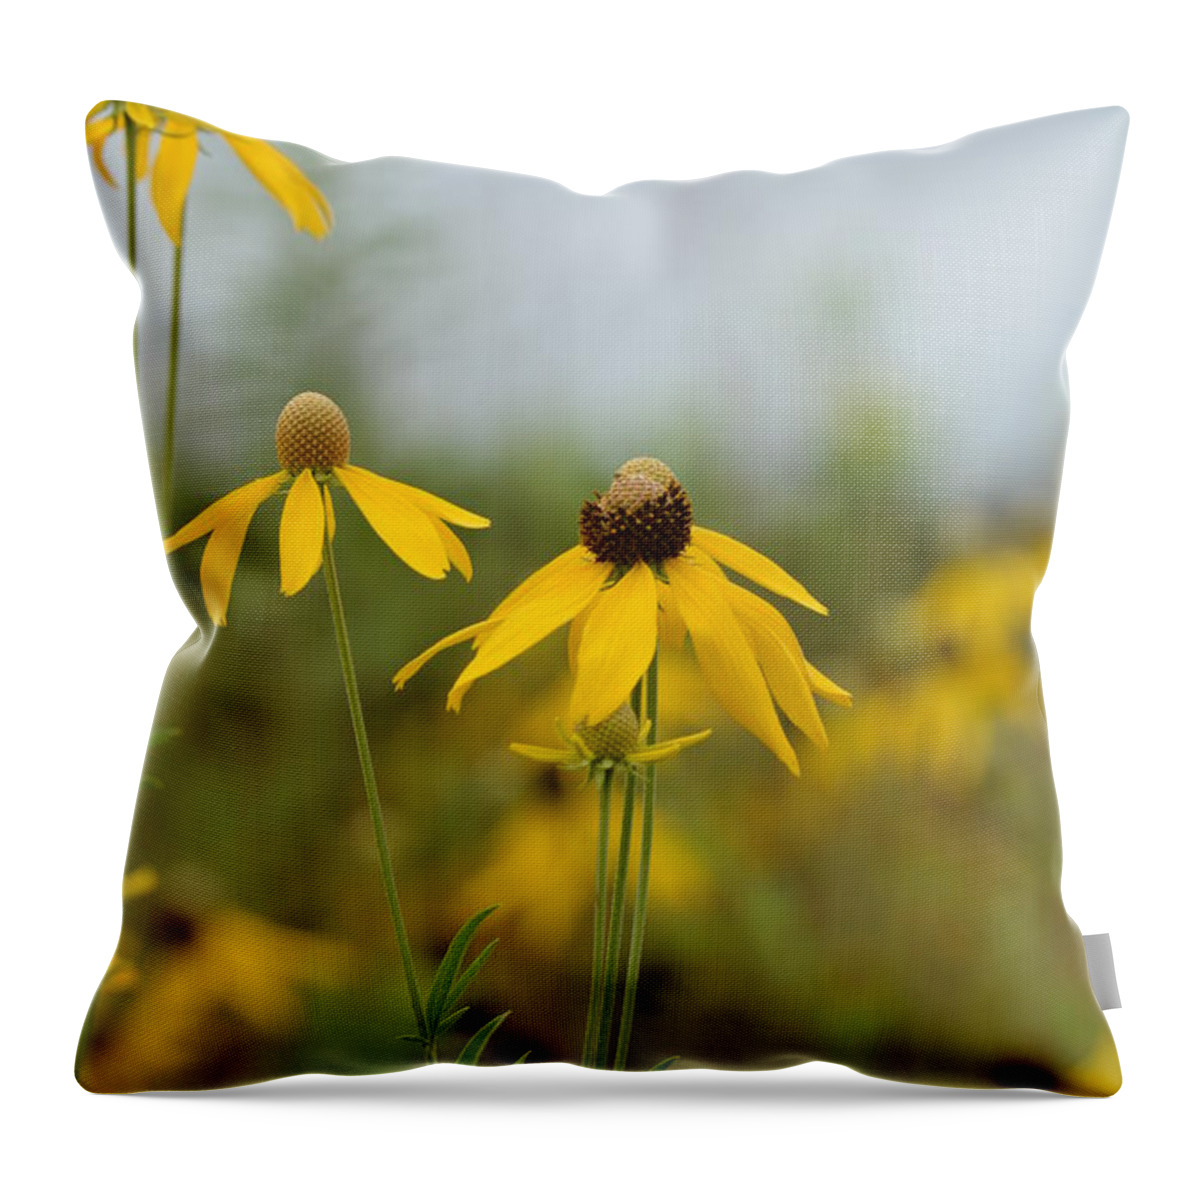 Daisies In The Mist Throw Pillow featuring the photograph Daisies in the Mist by Maria Urso